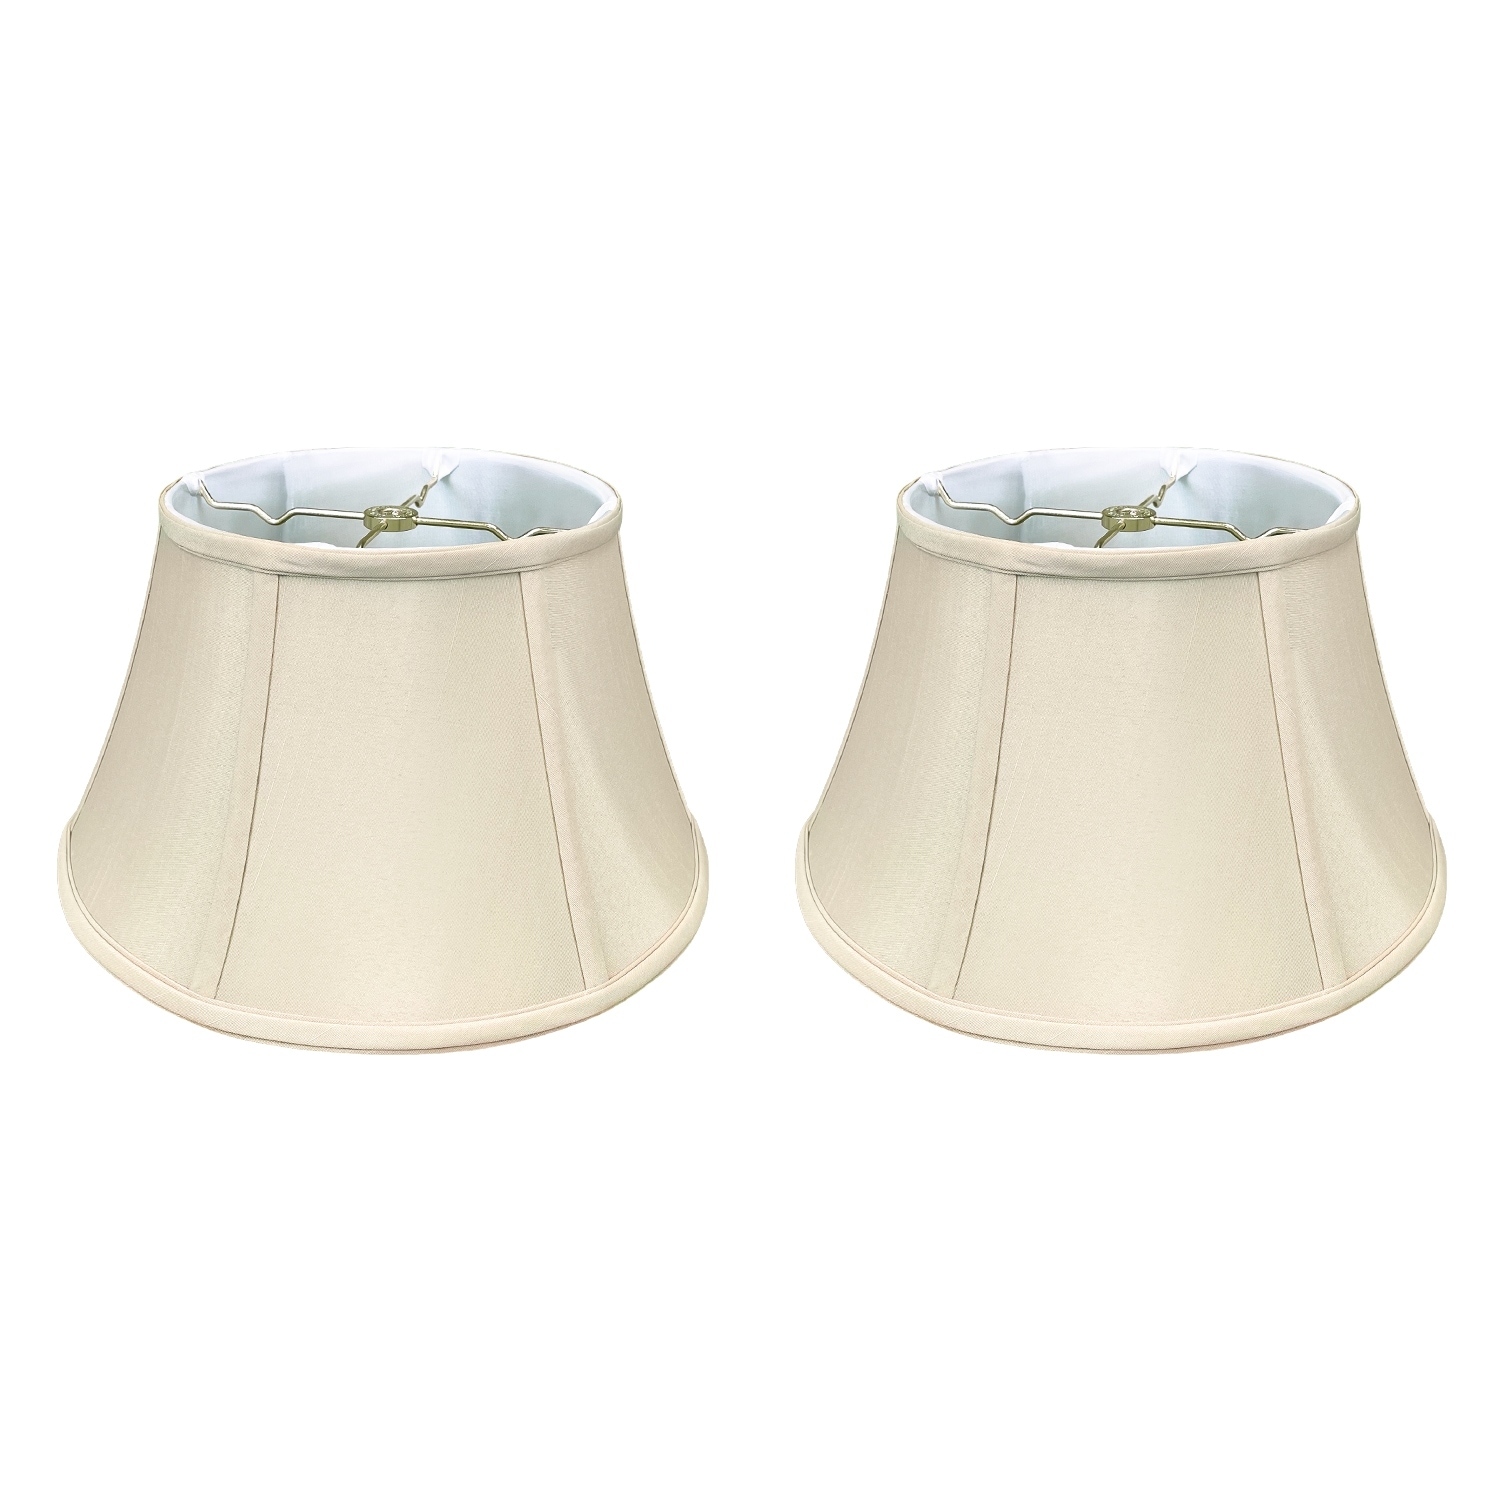 Royal Designs Shallow Drum Bell Billiotte Lamp Shade BS-711-19WH White 13 x 19 x 11.26